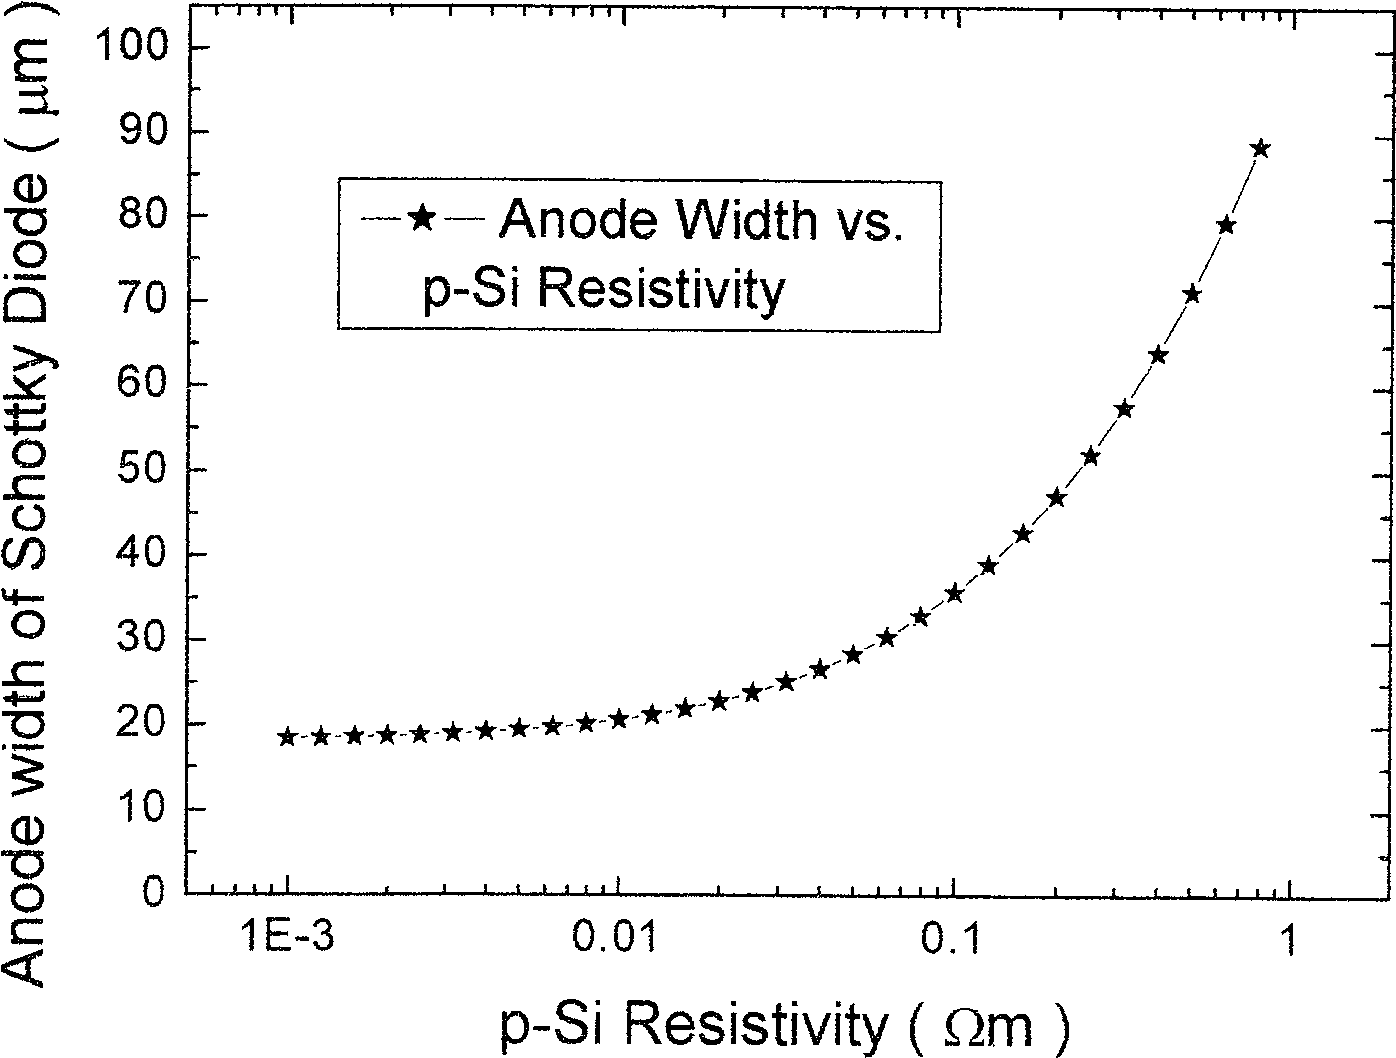 Metal/gallium nitride aluminum /gallium nitride lateral direction schottky diode with low current collection side effect and method of producing the same